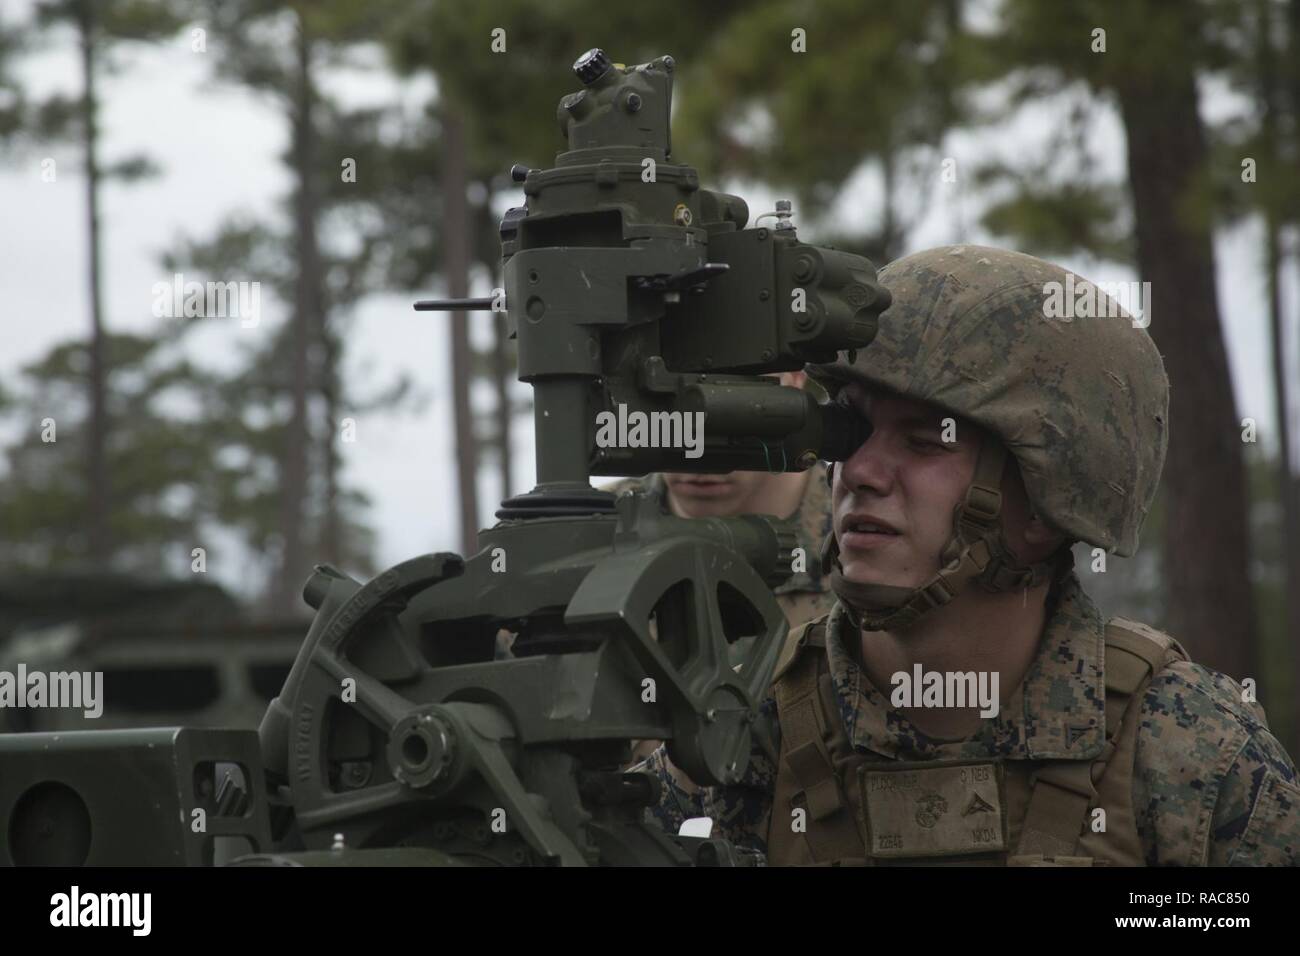 Lance Cpl. Christopher Ploof aims down the sight of an M777A2 towed 155mm howitzer at Camp Lejeune, N.C., Jan. 18, 2017. Ploof is attending the Artillery Training School as part of a certification course to become a gunner for the howitzer, which takes approximately two weeks to complete. Ploof is a field artillery cannoneer with 1st Battalion, 10th Marine Regiment, 2nd Marine Division. Stock Photo